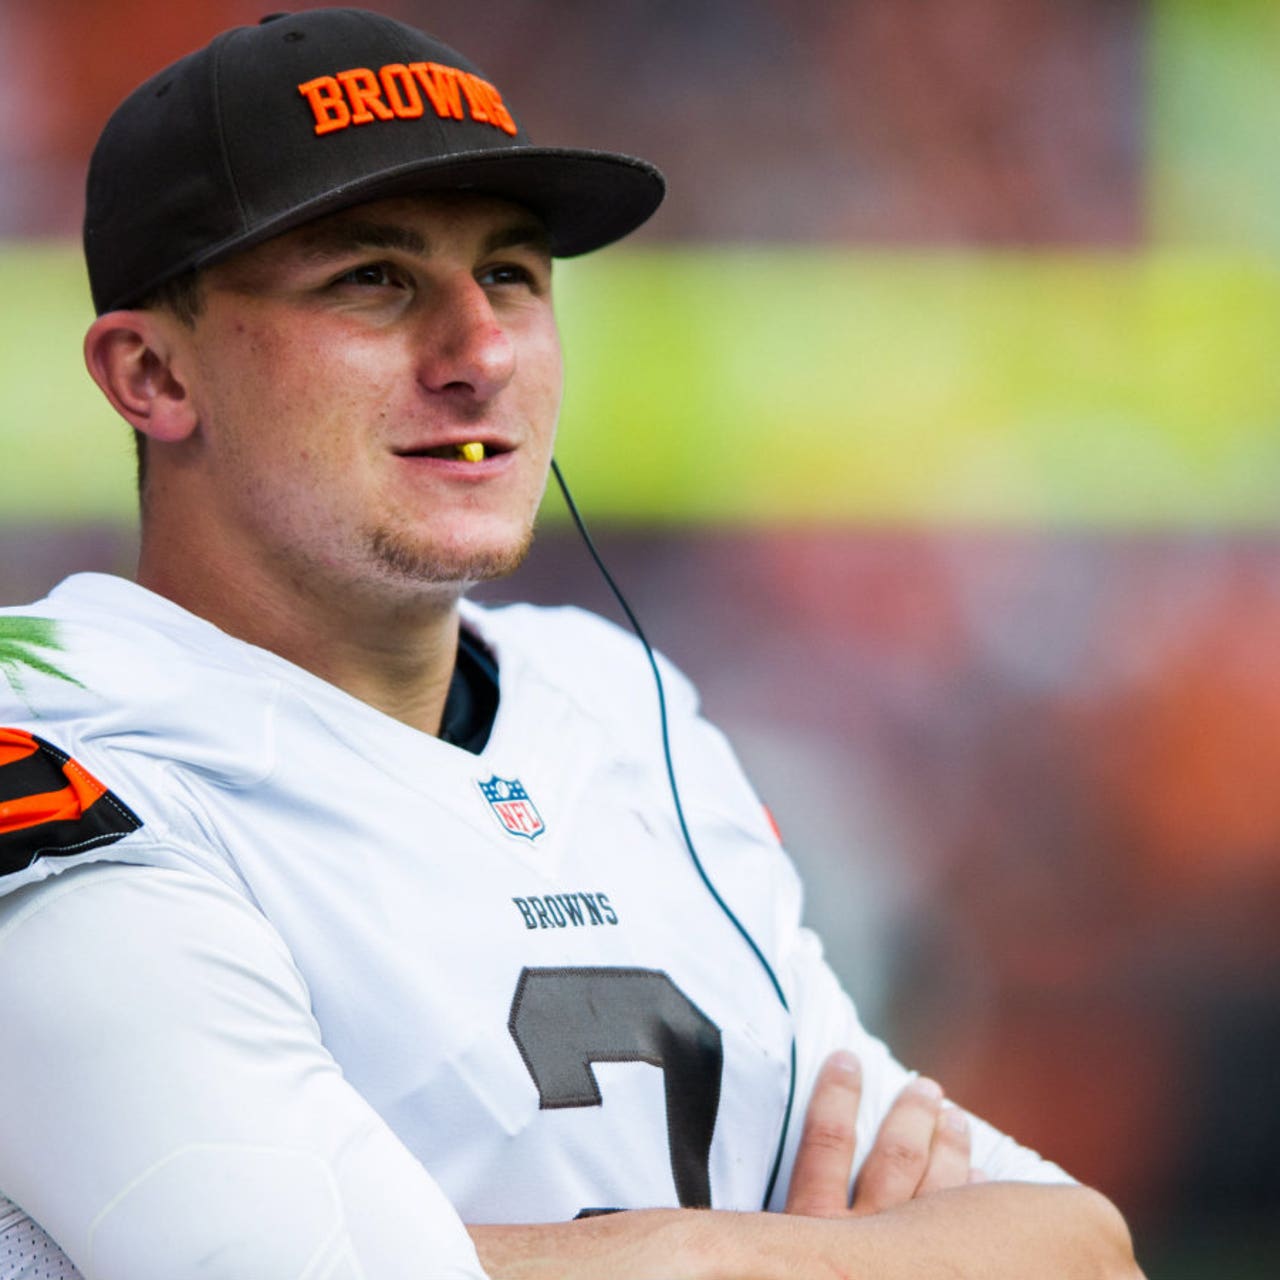 Johnny Manziel posts his phone number on Twitter